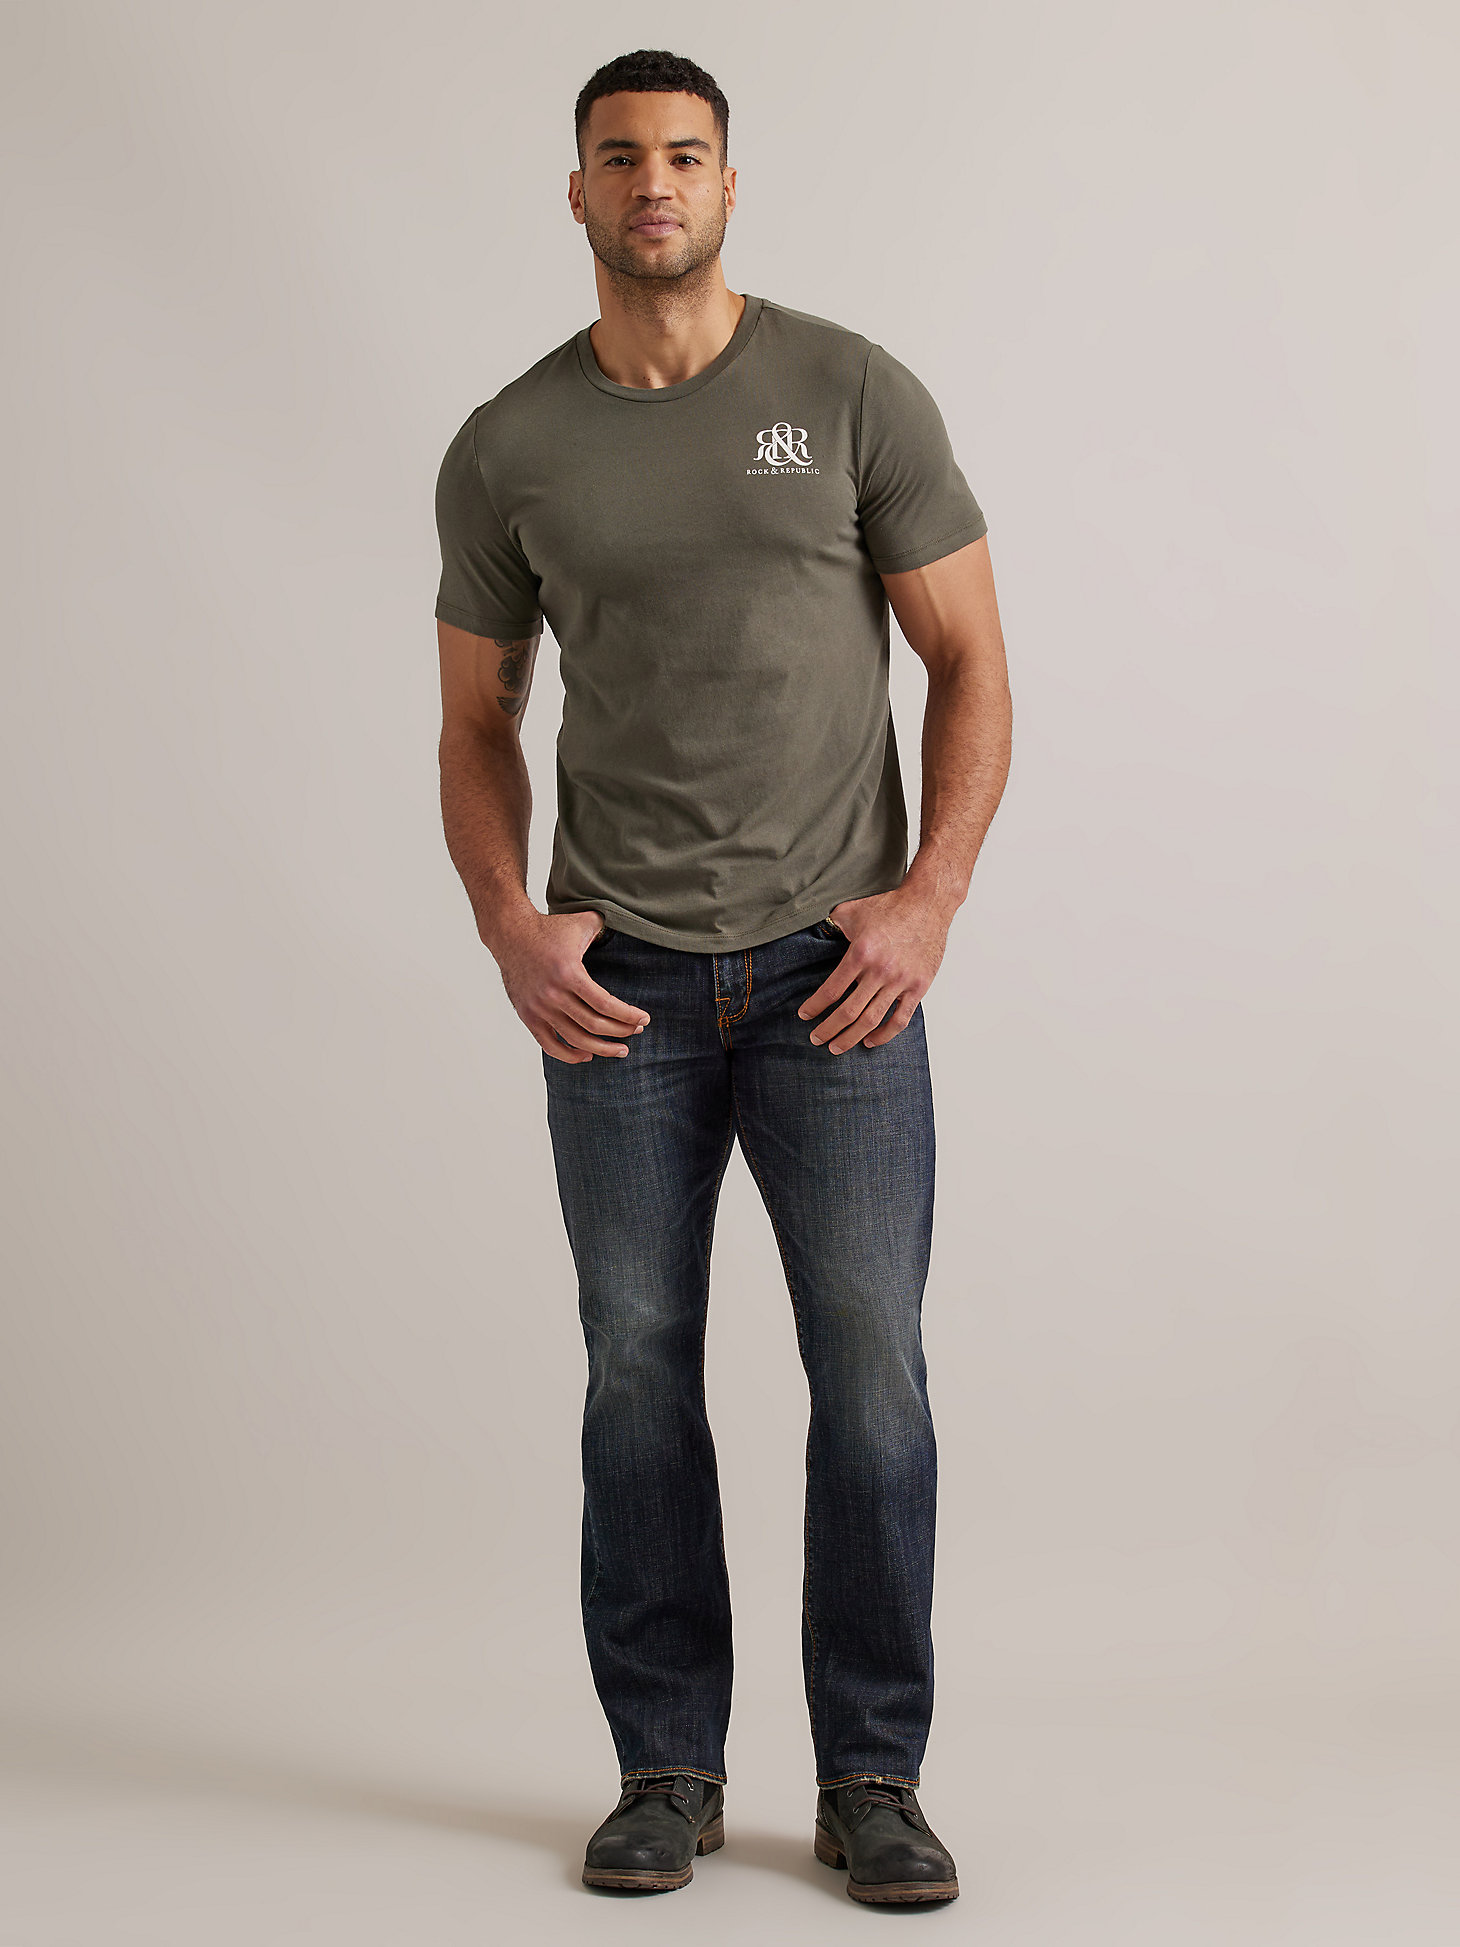 Short Sleeve Logo Tee in Olive main view